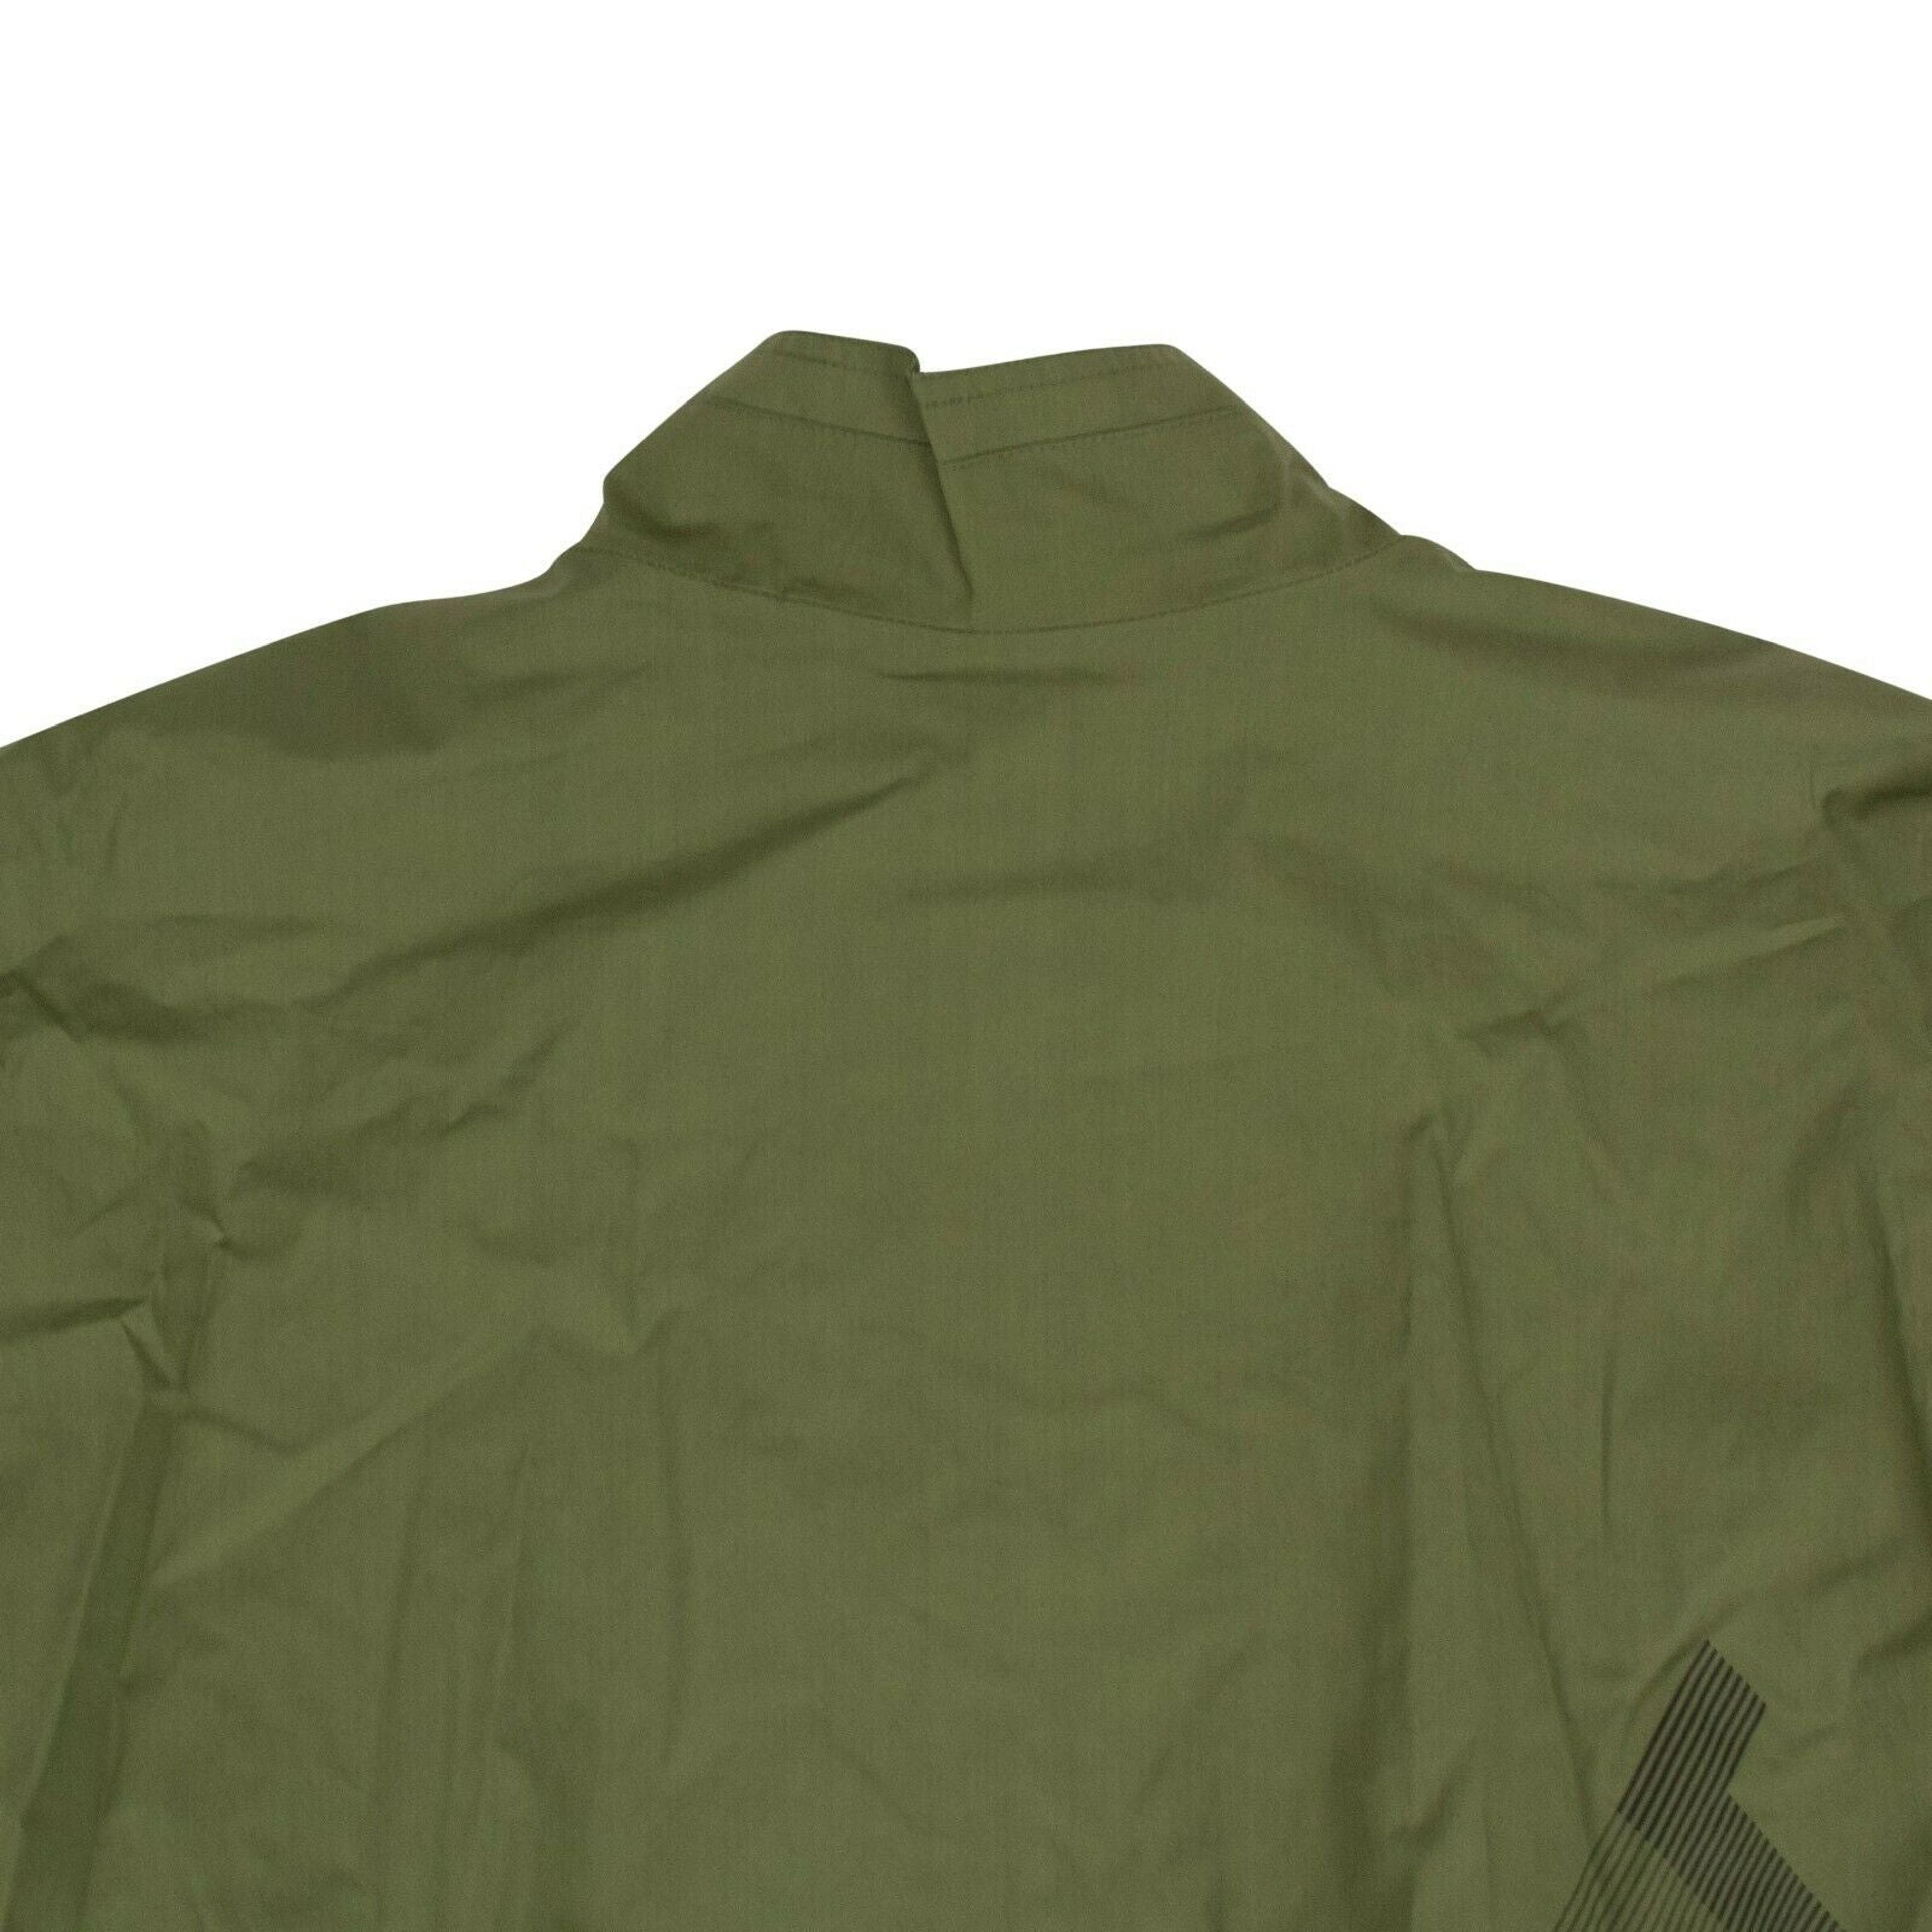 Alternate View 5 of Green And Black Panel Lightweight Jacket